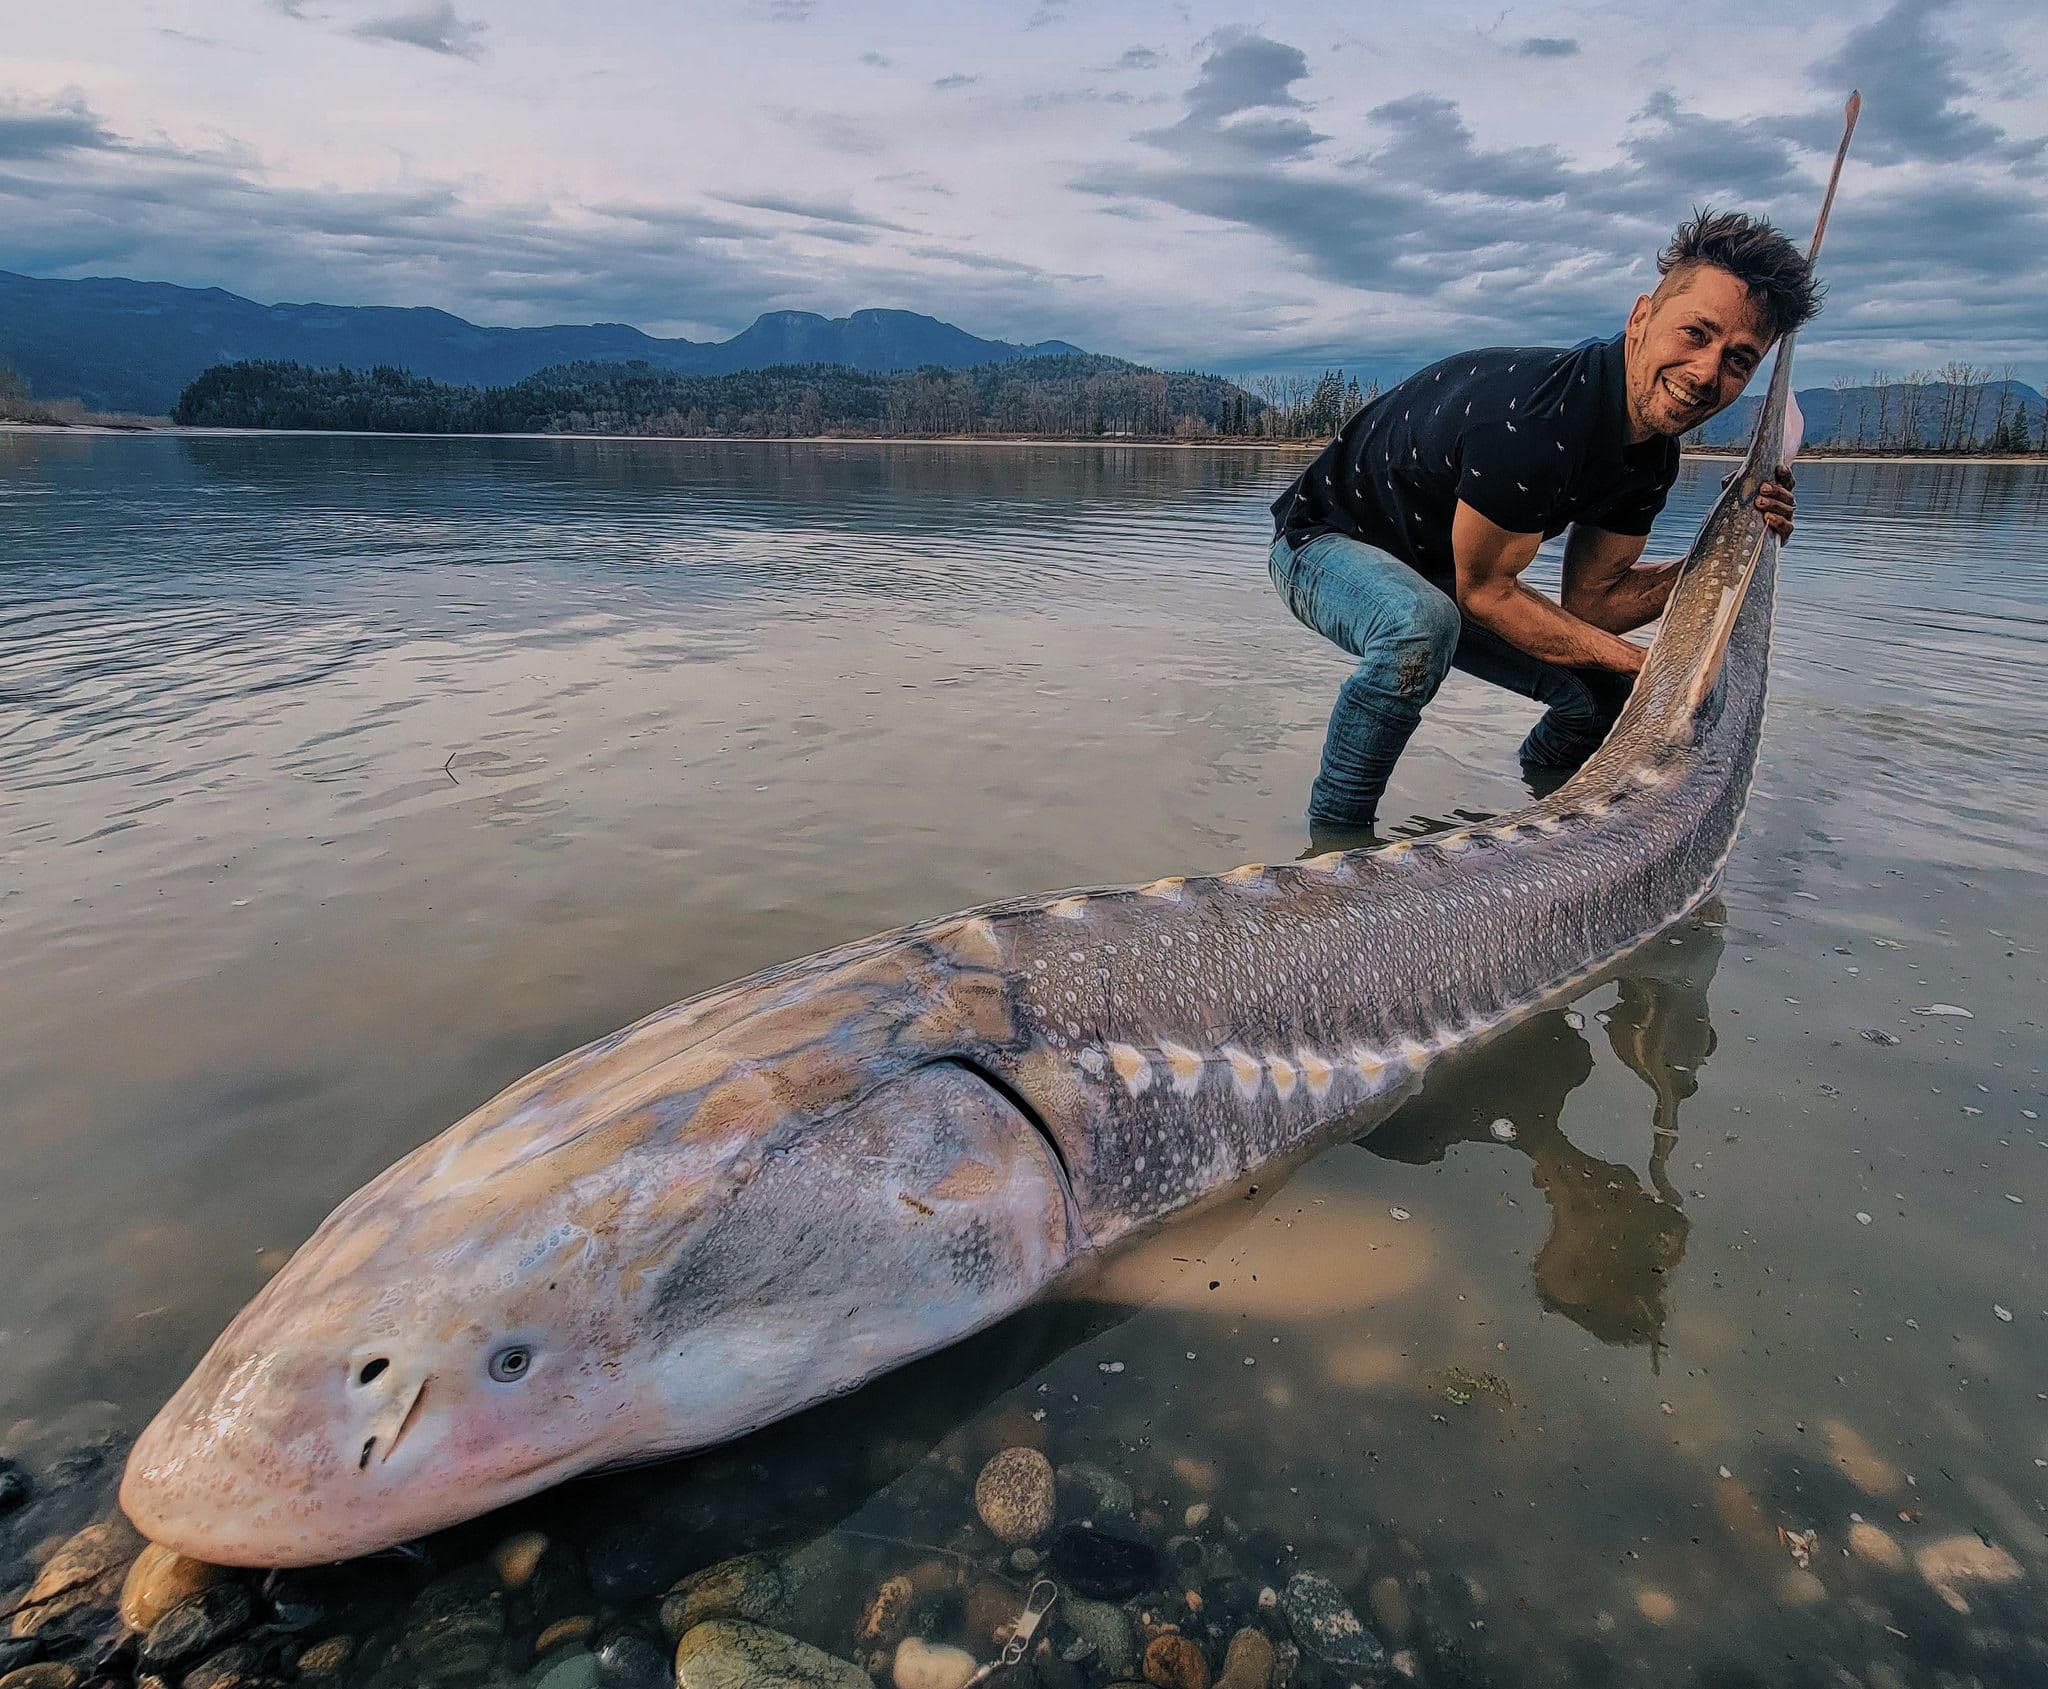 Giant Sturgeon Fish In Canada - First Caught And Then Released